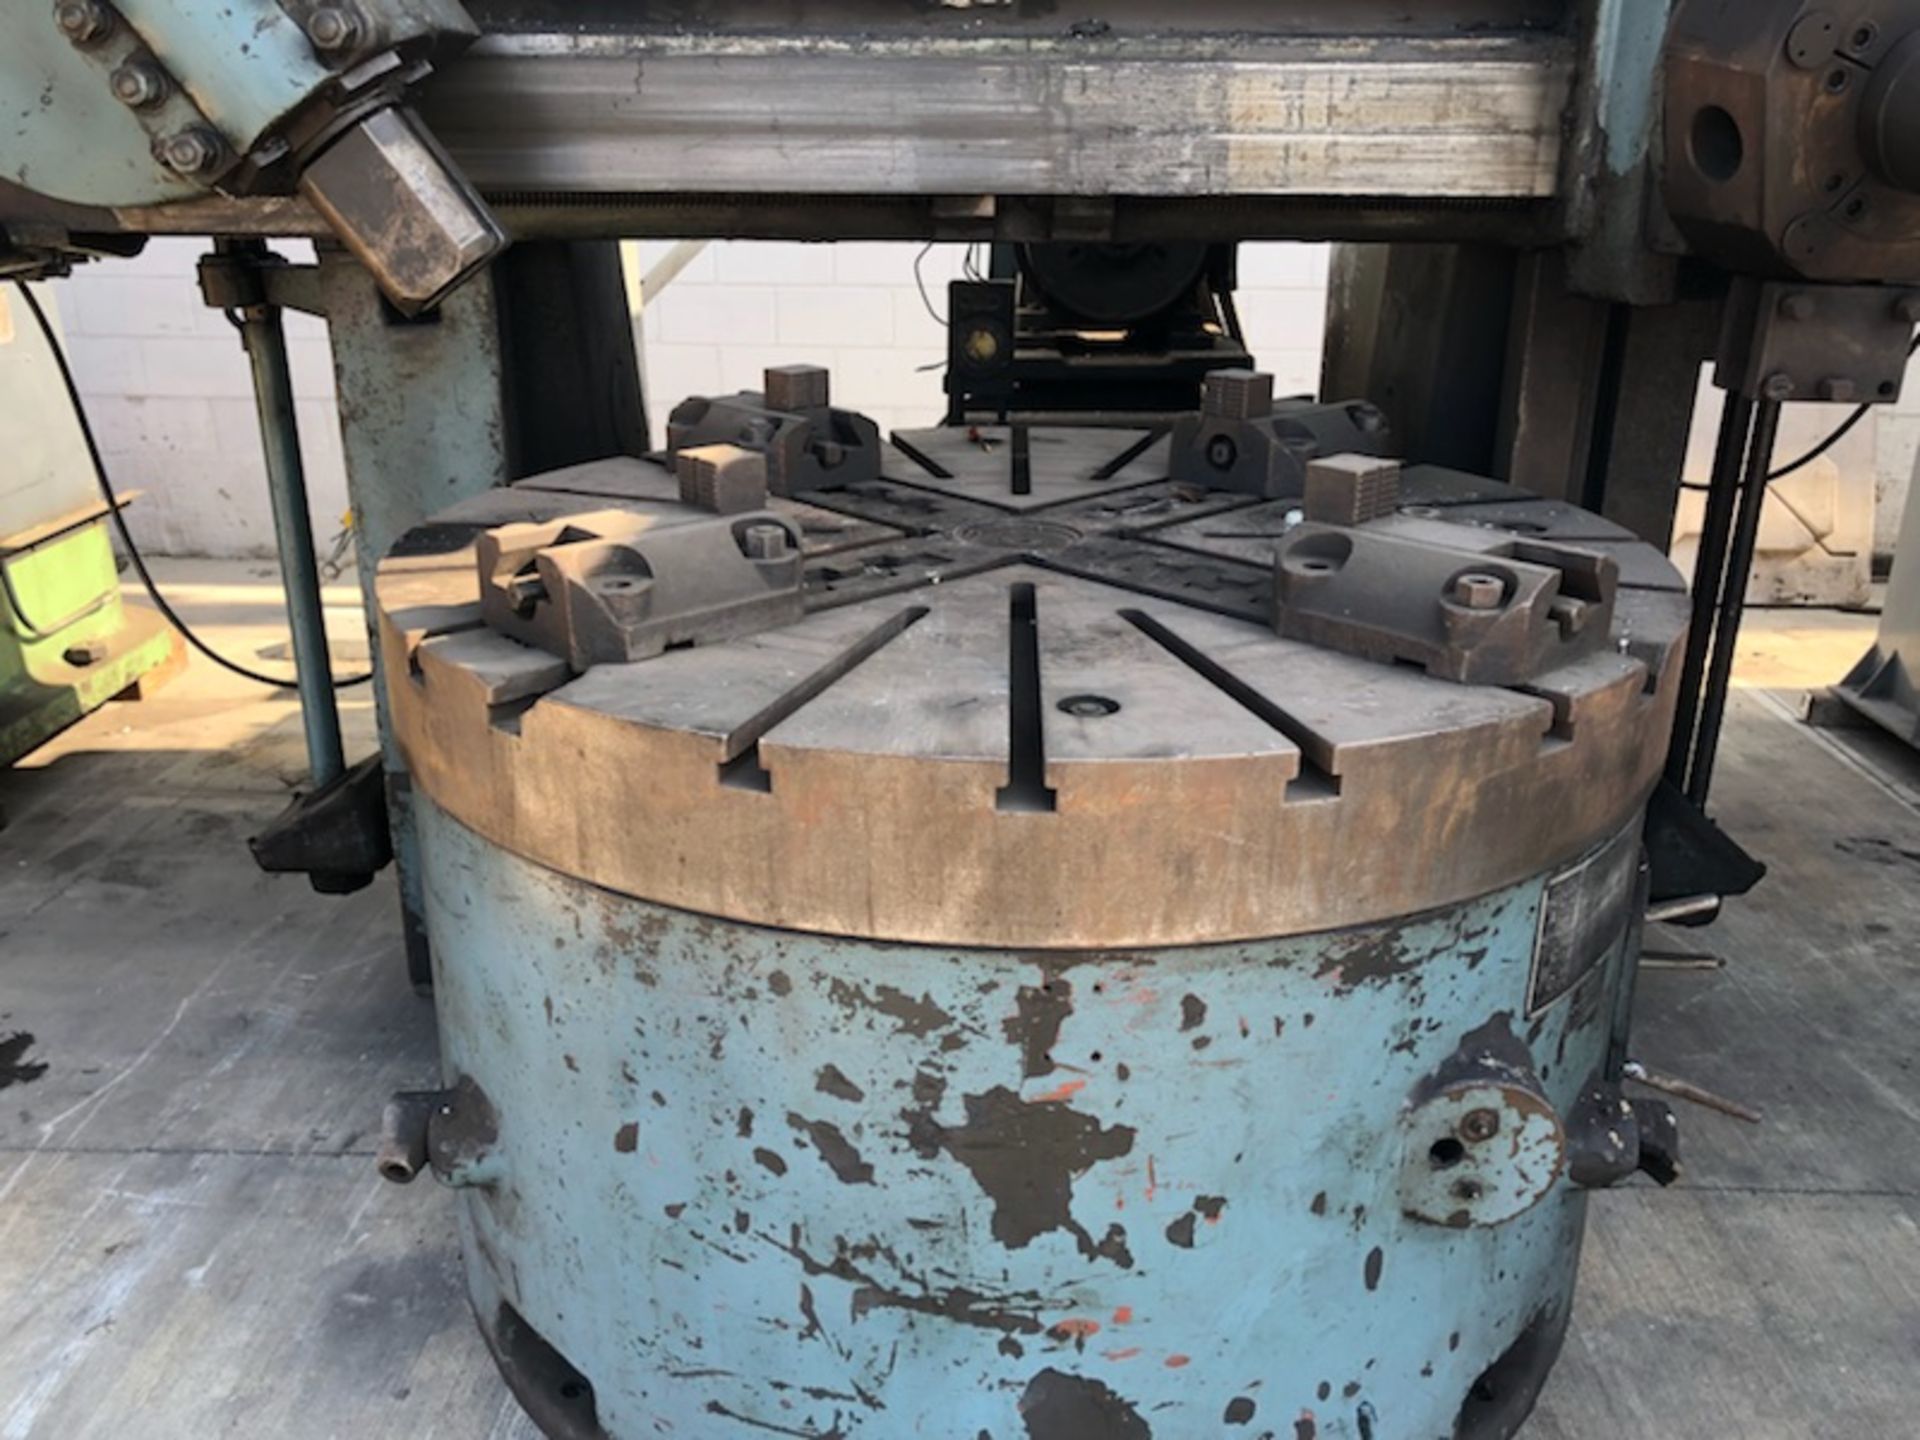 Schiess 59" Vertical Boring Mill with 5 position side Turred Head. With 64" swing.